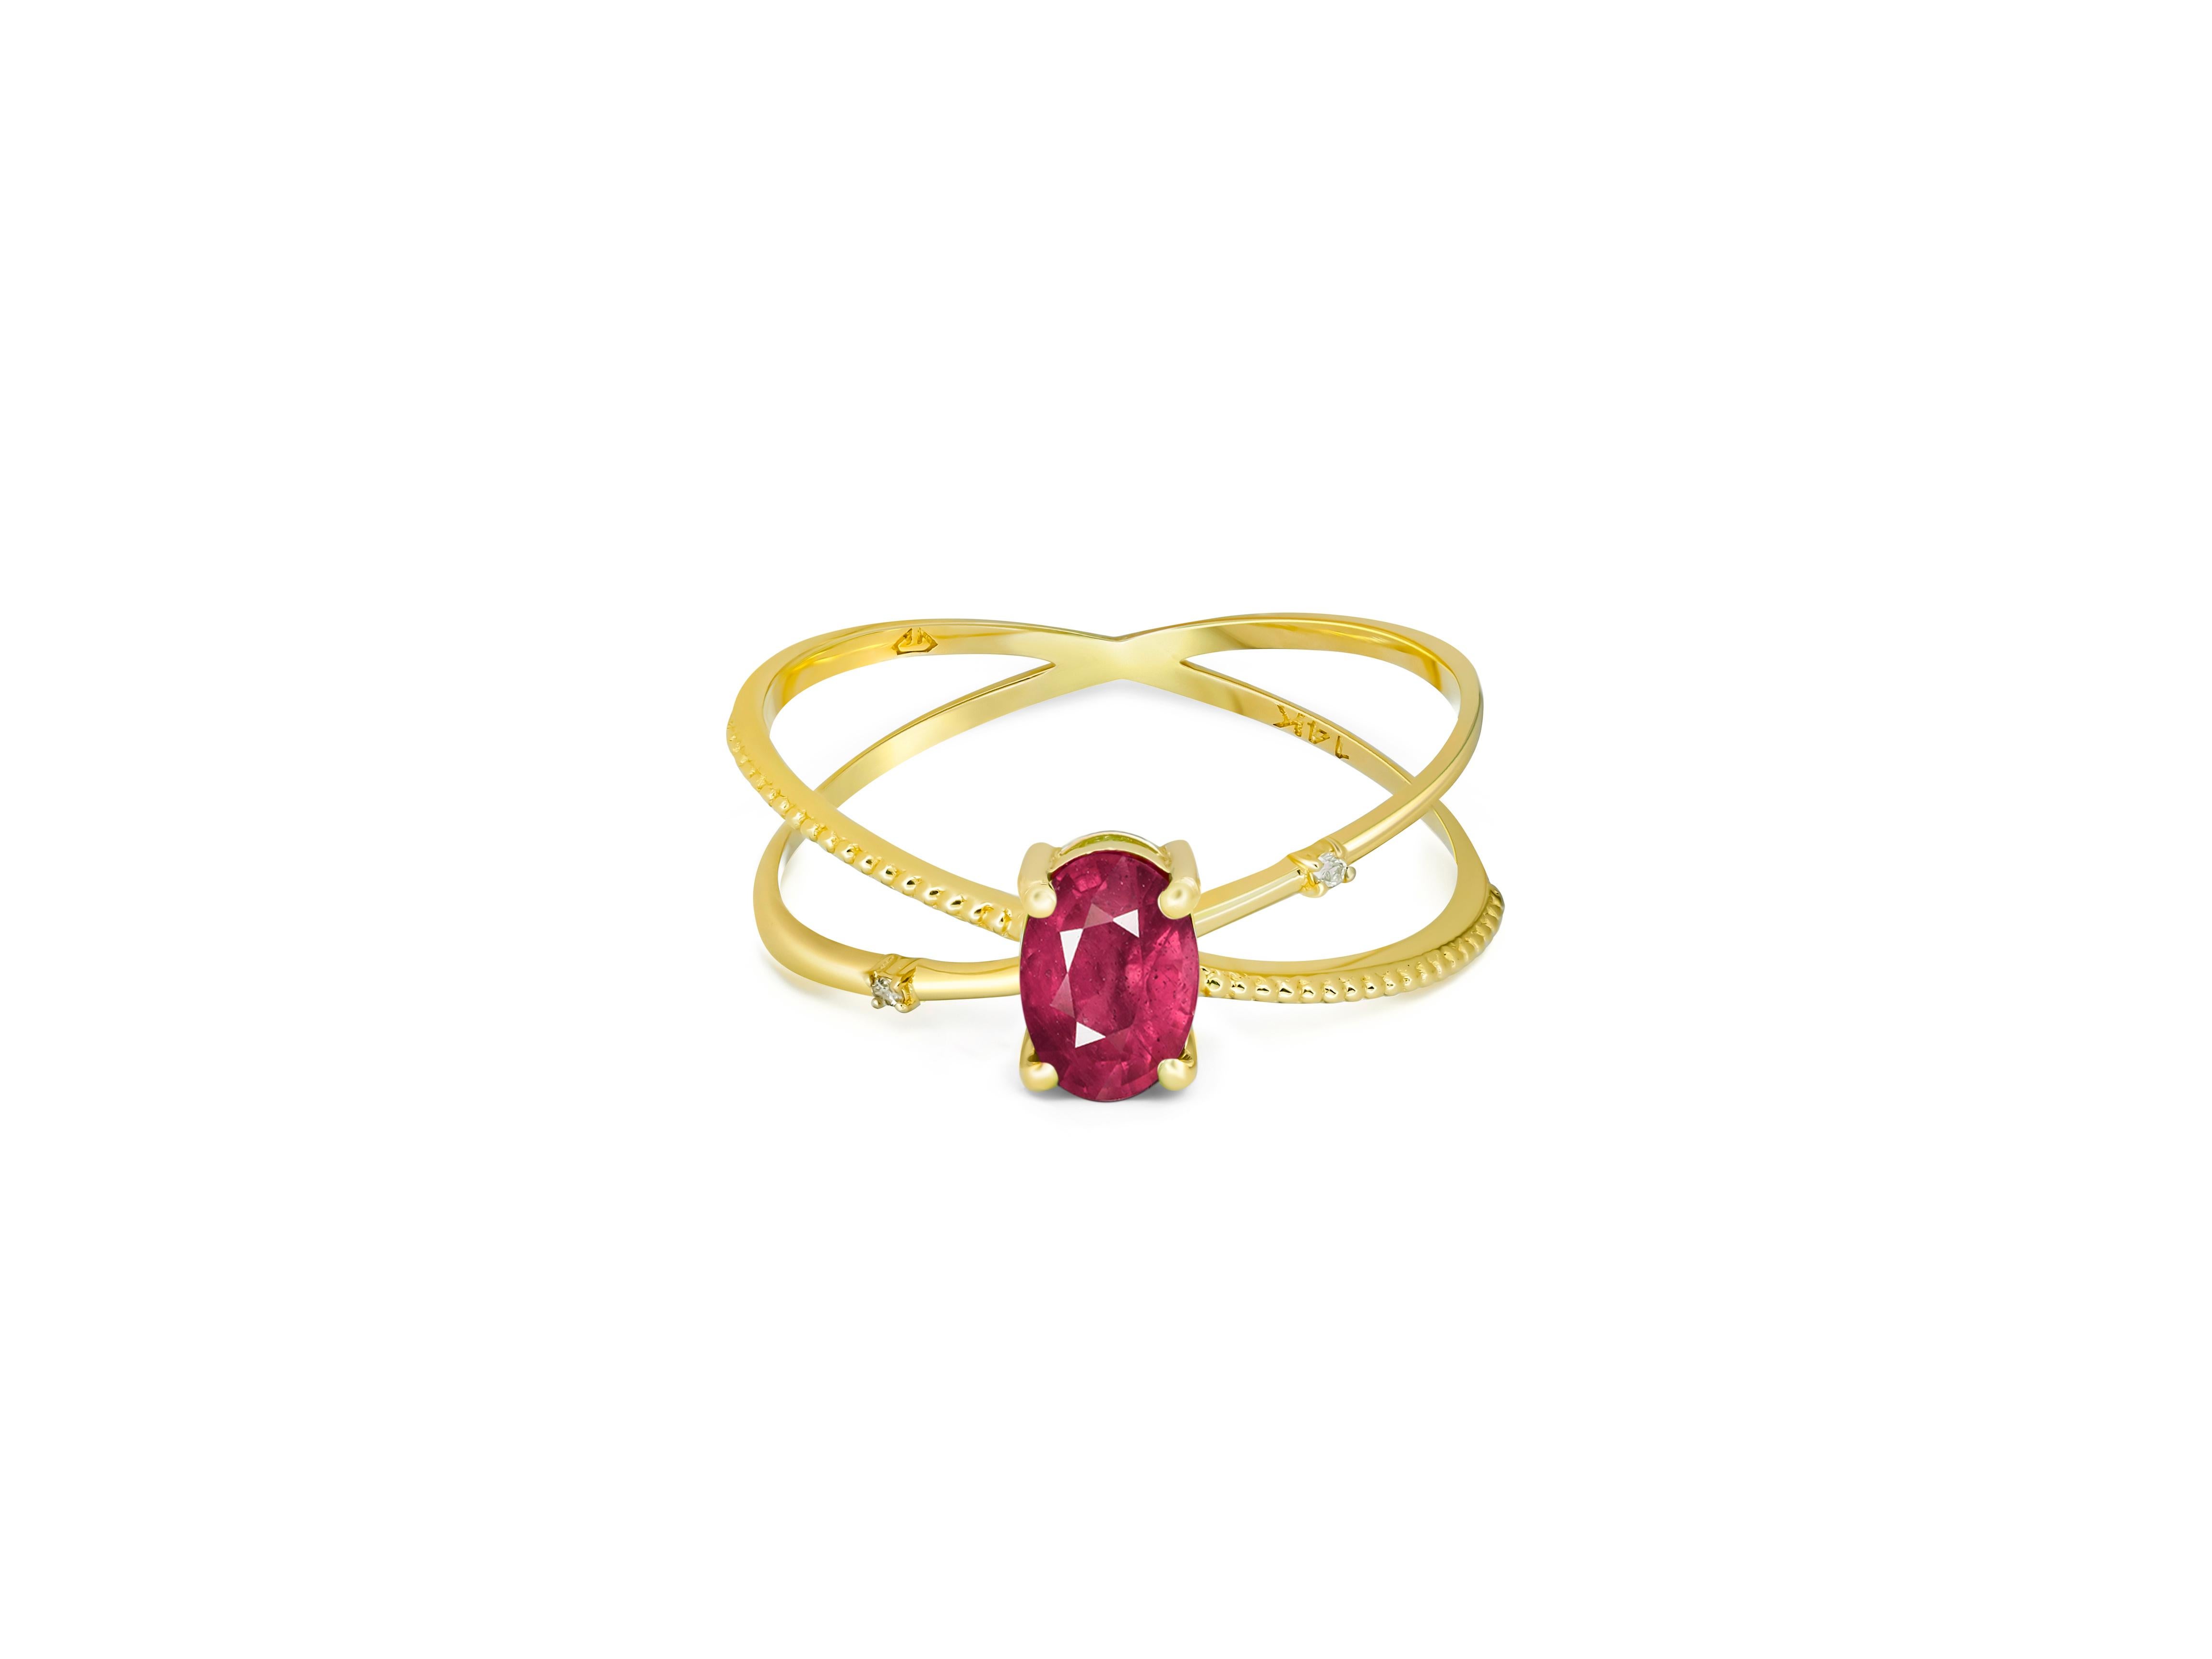 Ruby spiral ring. 
Oval Ruby ring. Ruby gold ring. 14k gold ring with Ruby. Minimalist Ruby ring. July Birthstone Ring.

Metal: 14k gold
Total weight: 1.9 g  depends from size.
 
Main Stone: Ruby
Shape: Oval  
Total Carat Weight: aprox 1 cts.
No. of